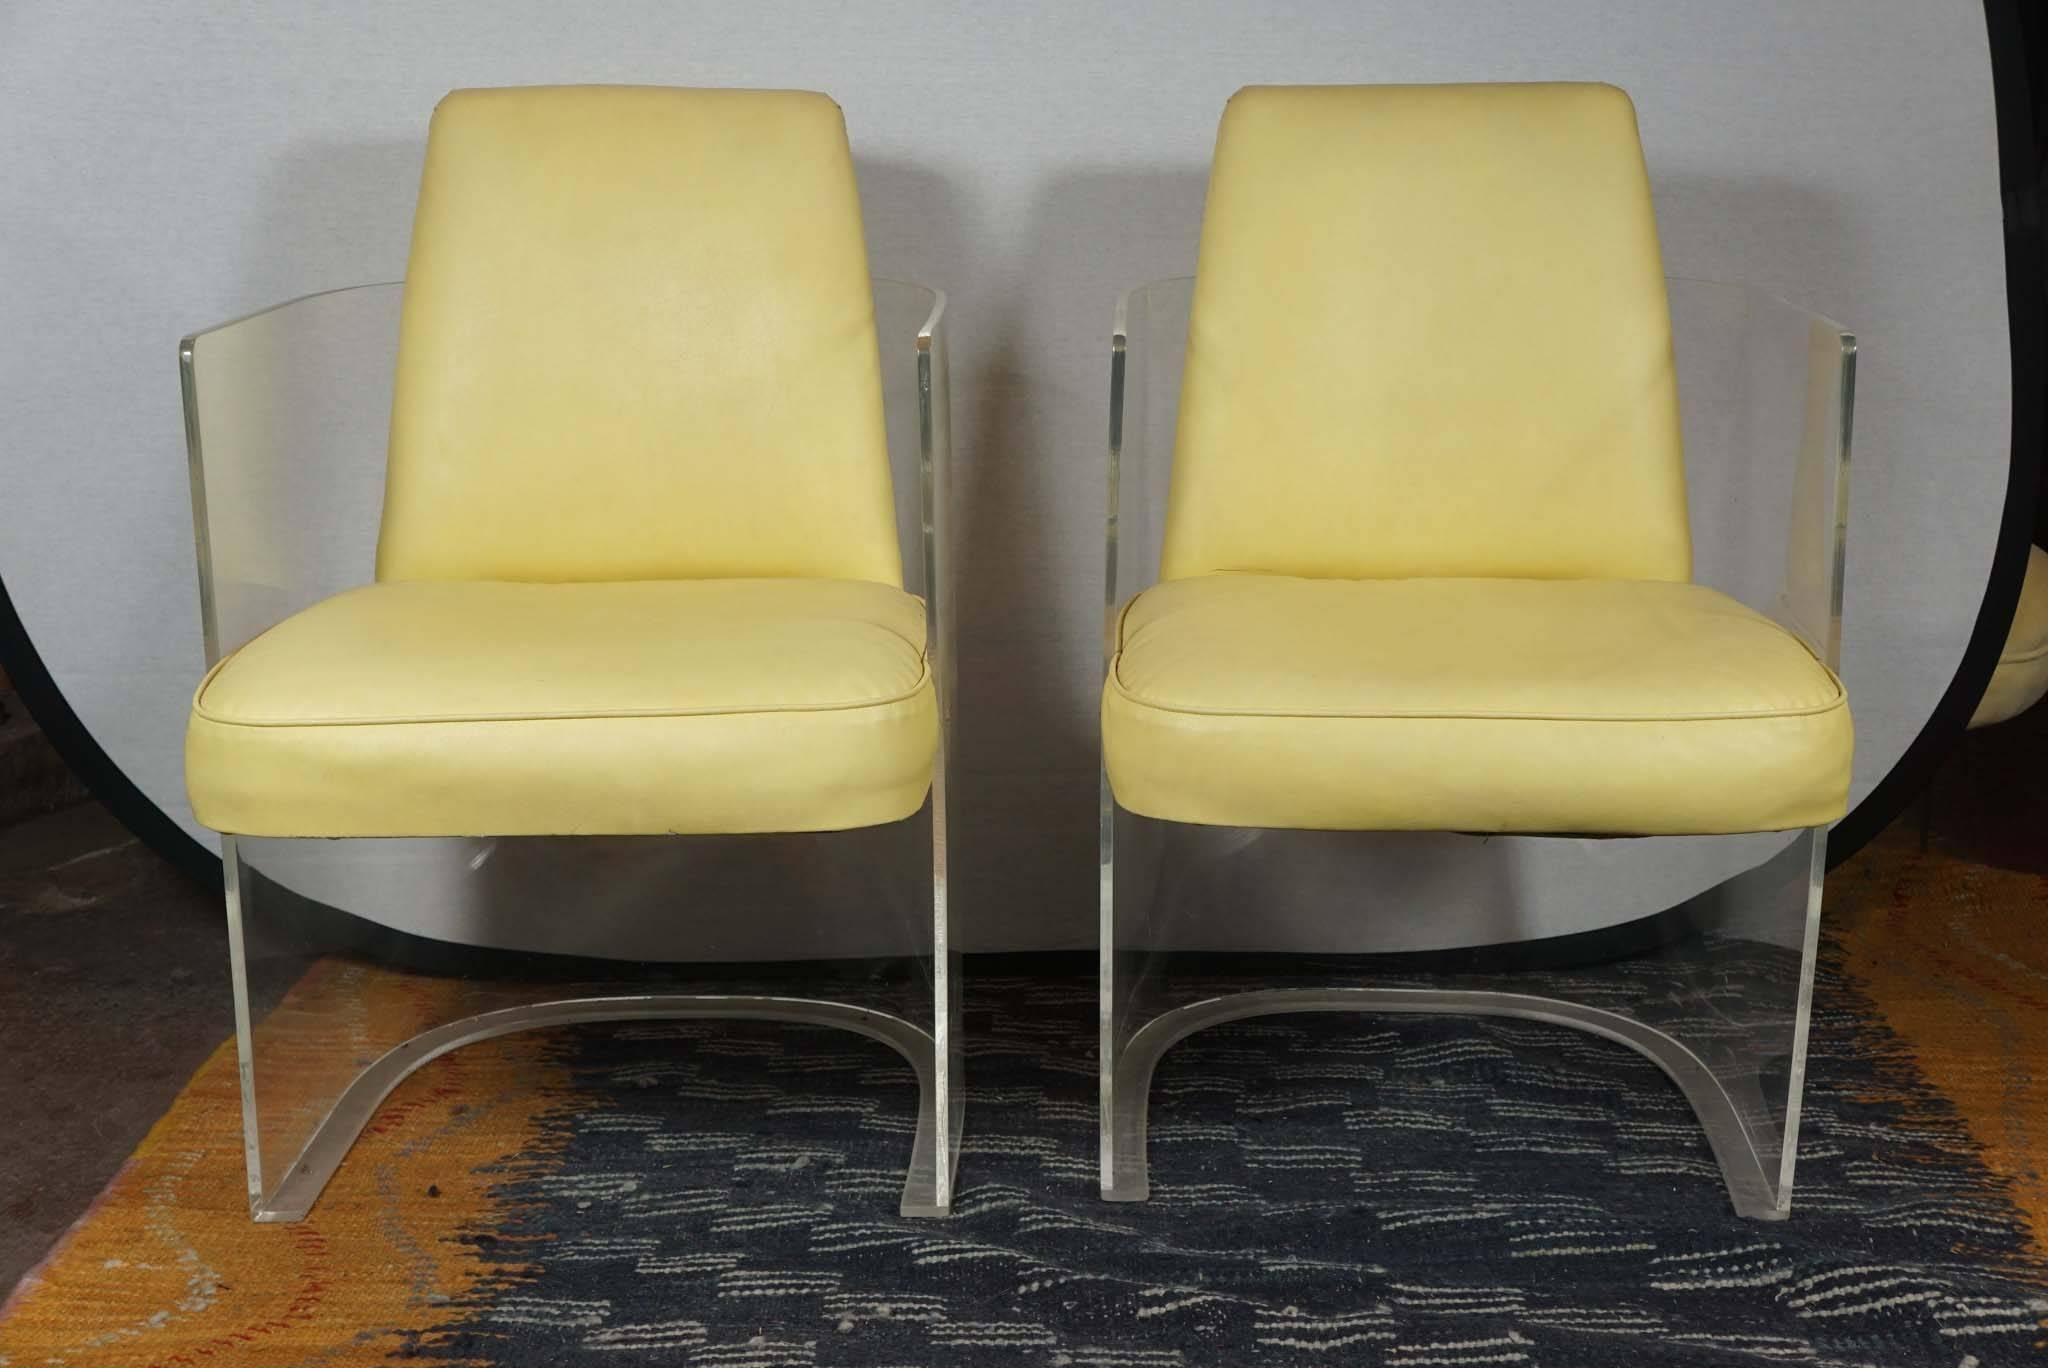 These custom-designed chairs by Vladimir Kagan, circa 1960 are in their original upholstery. Plexiglass with lemon colored vinyl in one of Kagan's most iconic and preferred designs. Incredibly comfortable or functional as well as chic.